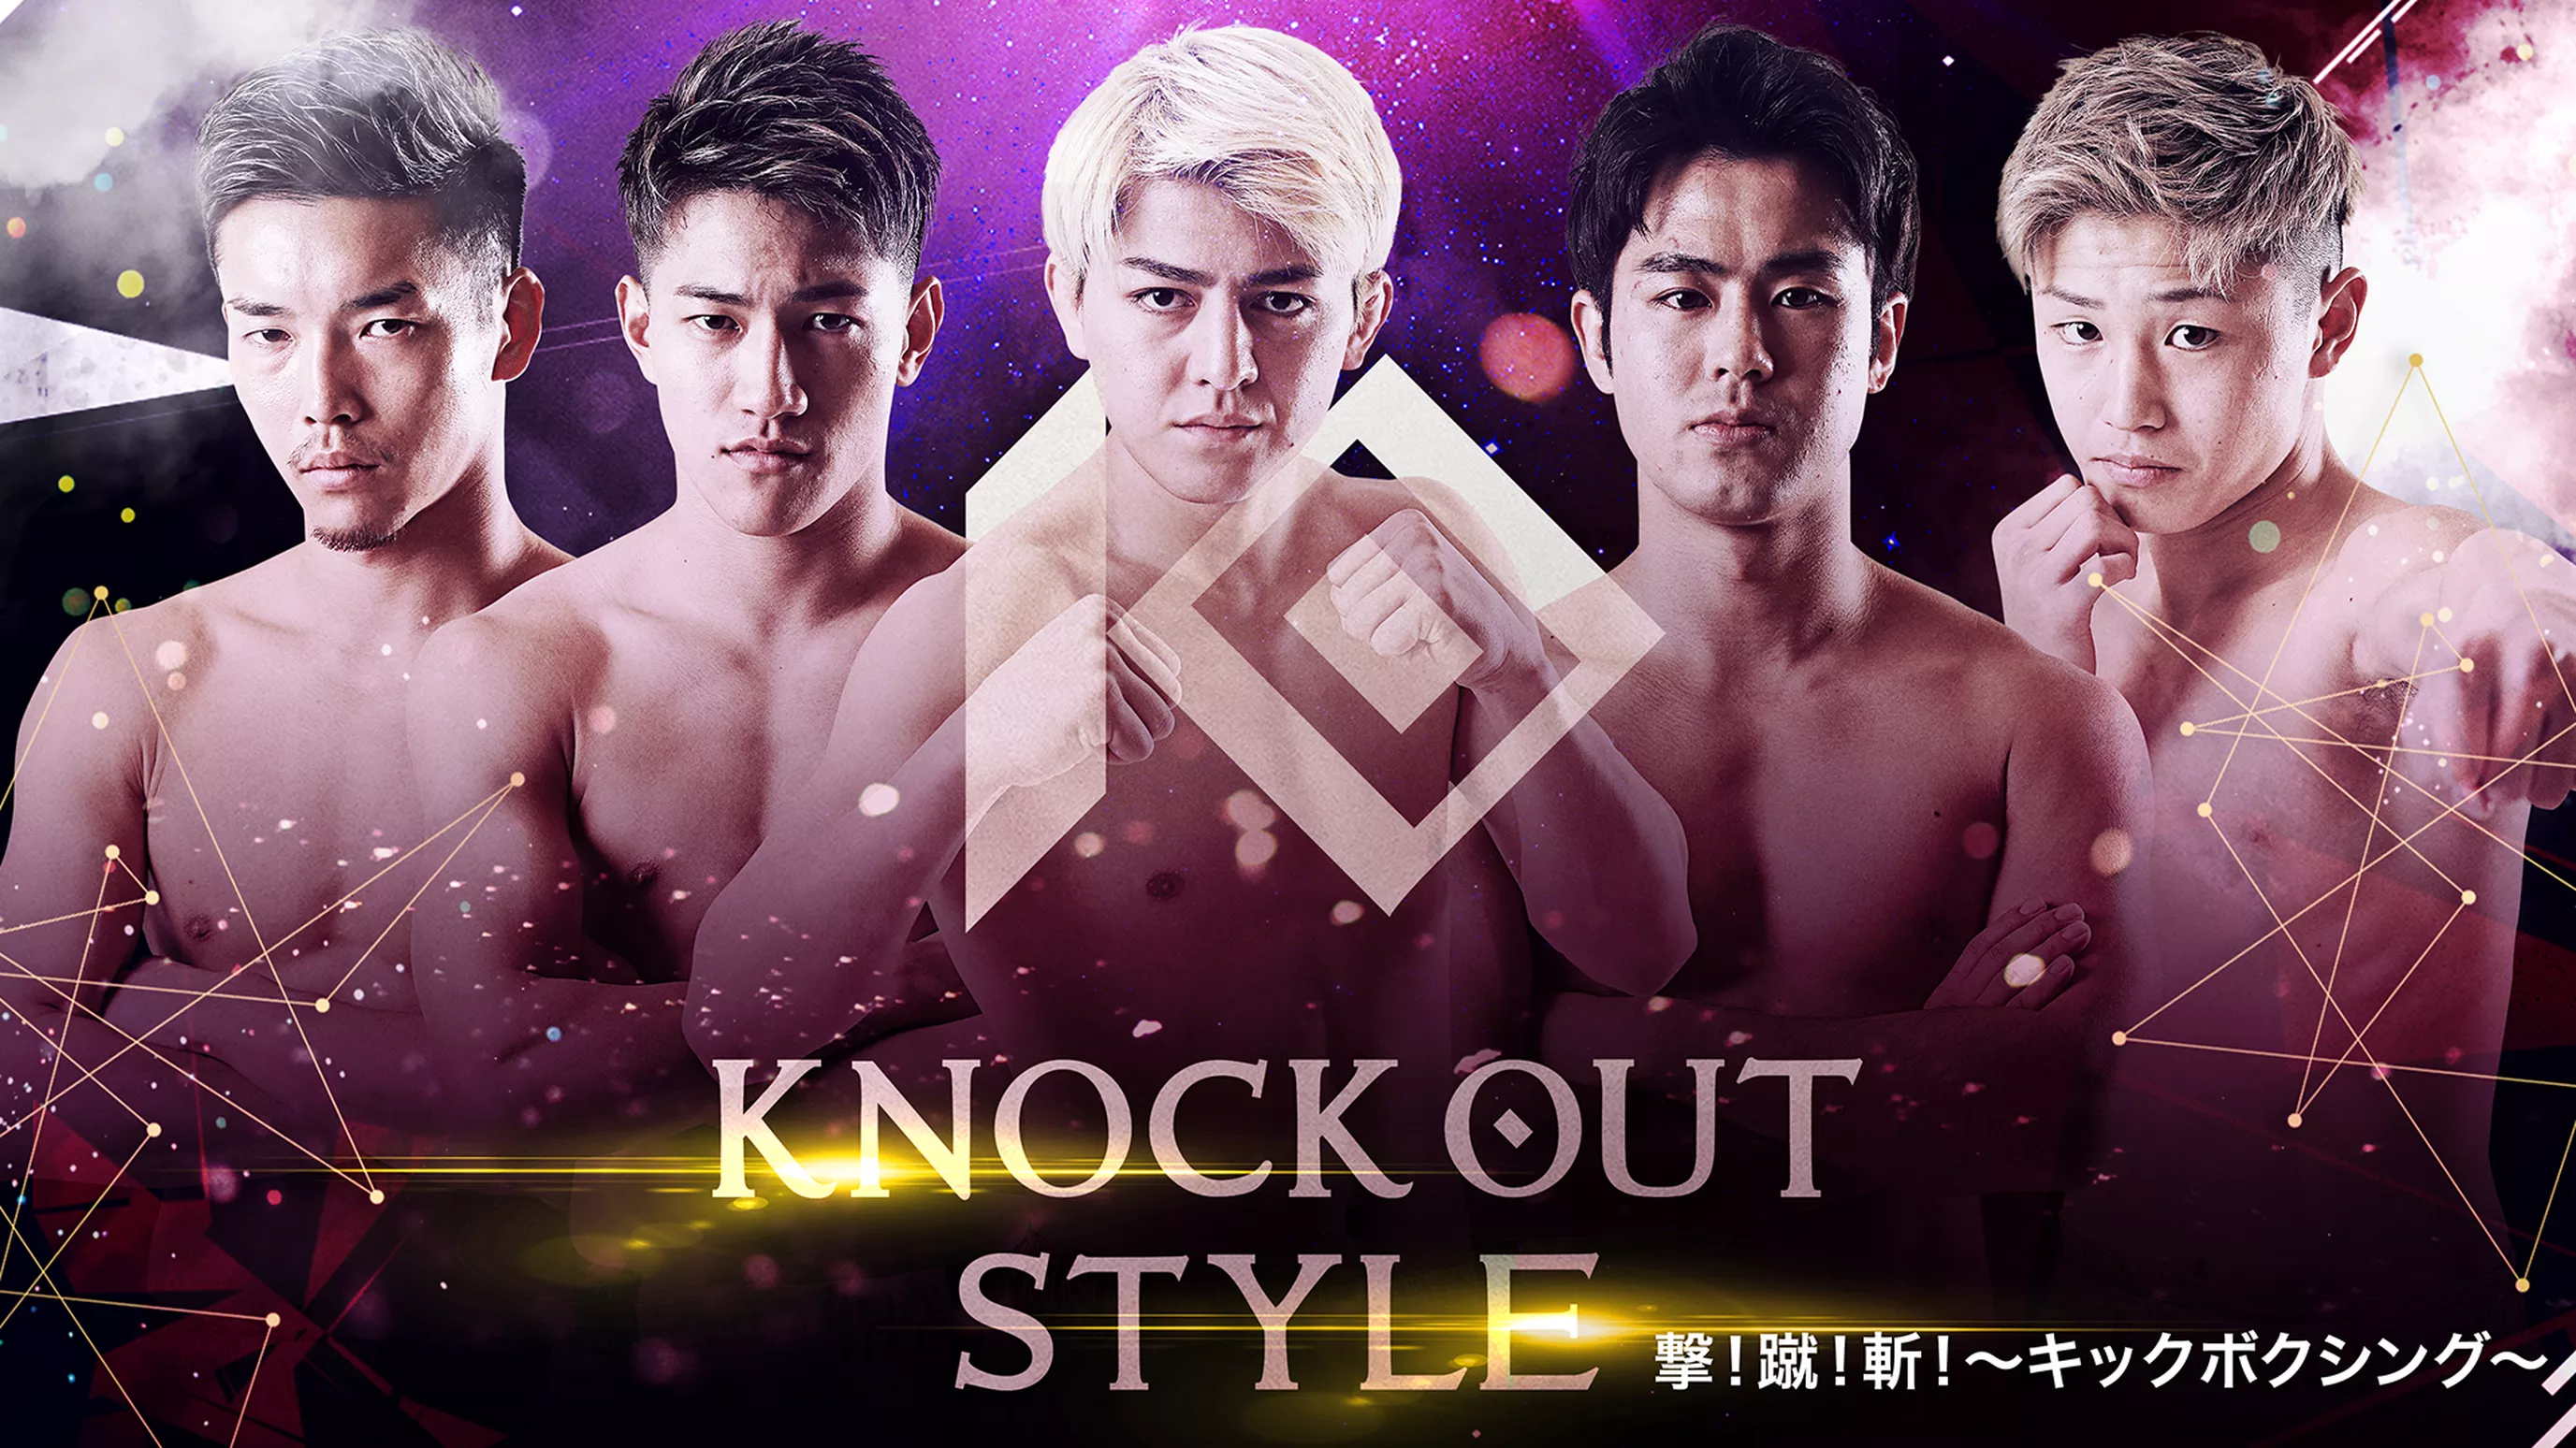 KNOCK OUT STYLE 撃！蹴！斬！～キックボクシング～